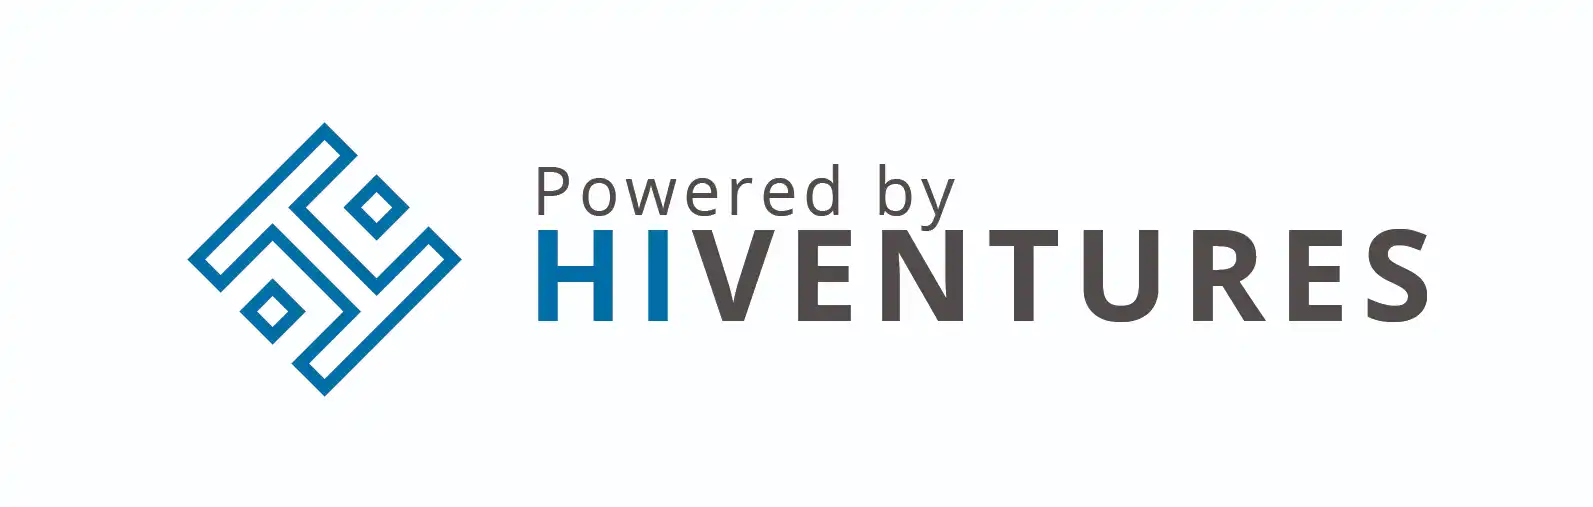 Powered by HIVENTURES